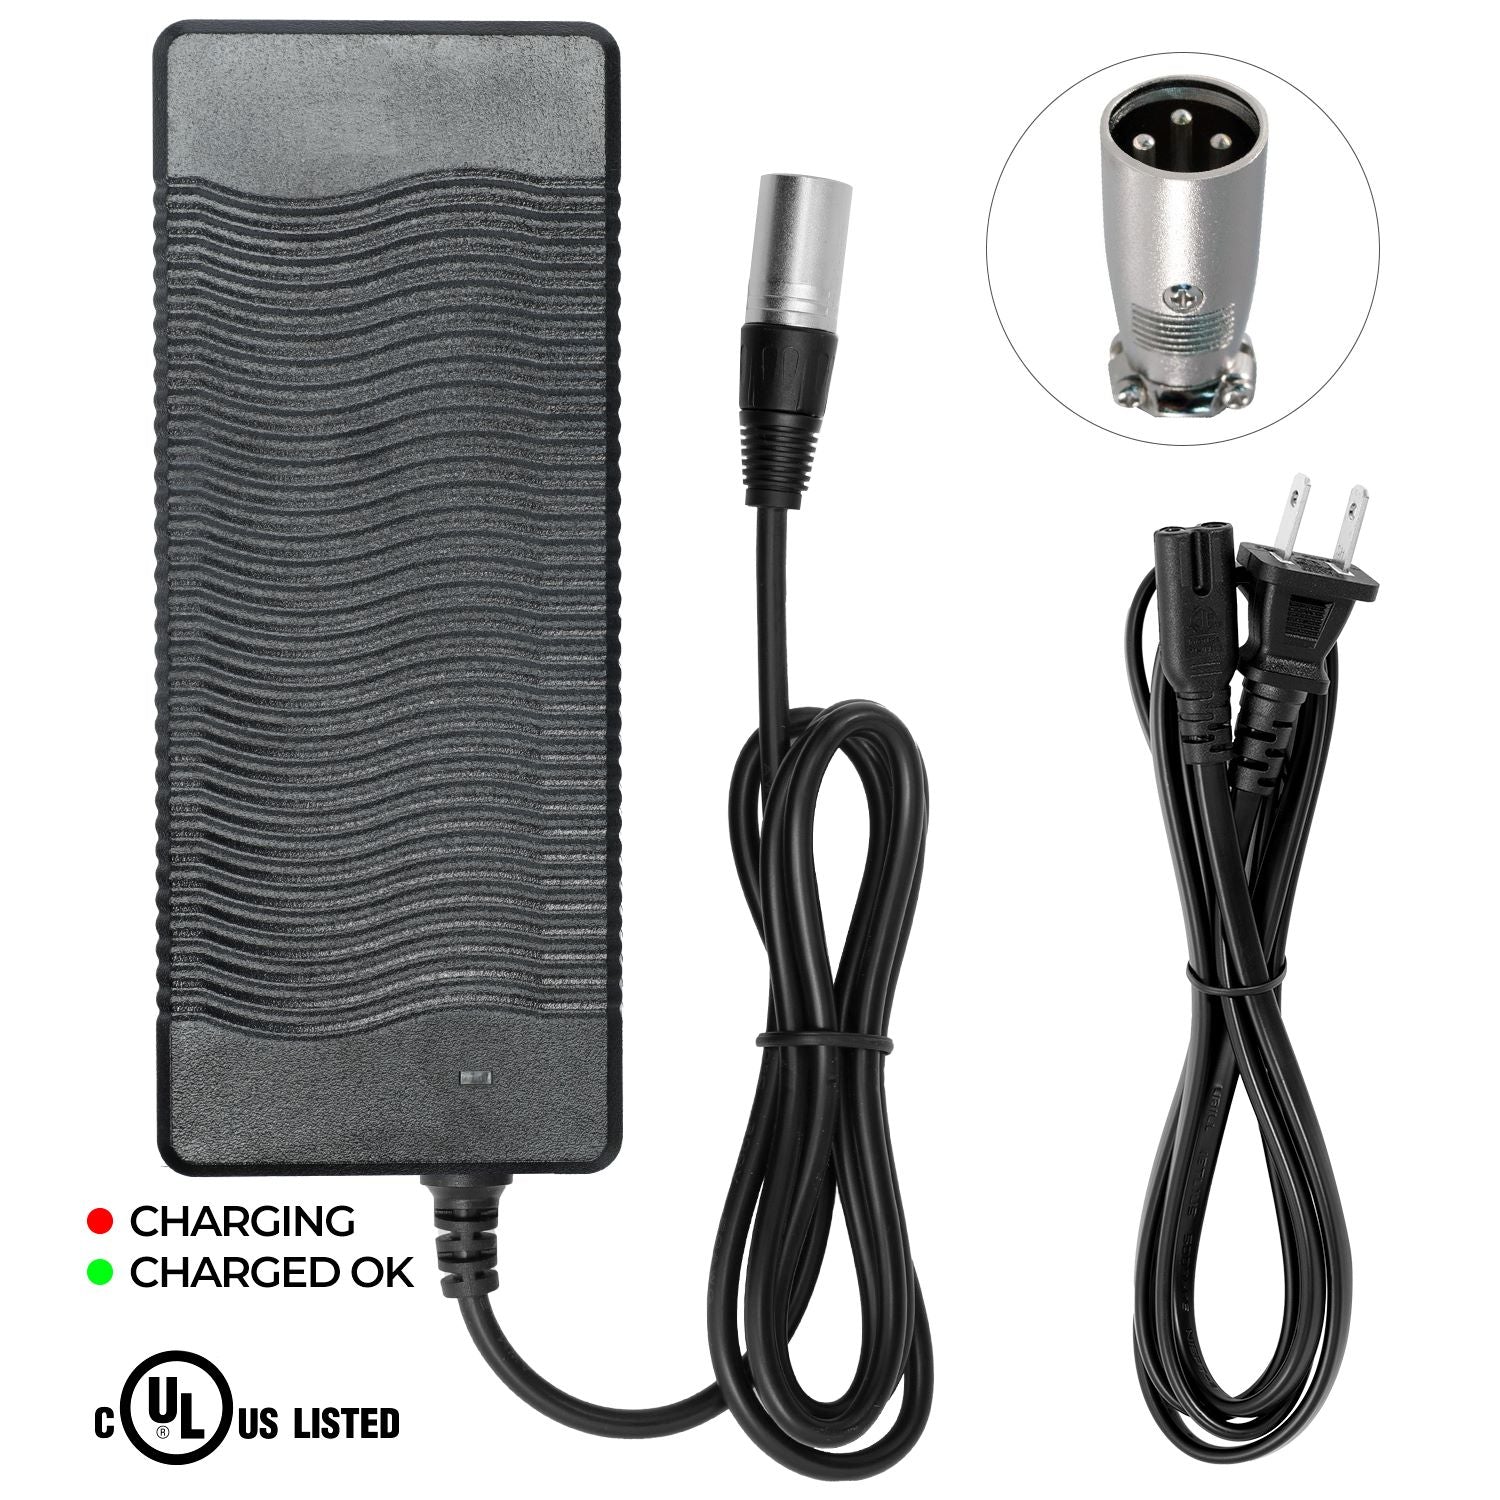 UL Listed Charger for Pedego Tandem Cruiser II eBike (NOT for Other Pedego Models,Please Check the DC Shape Carefully)